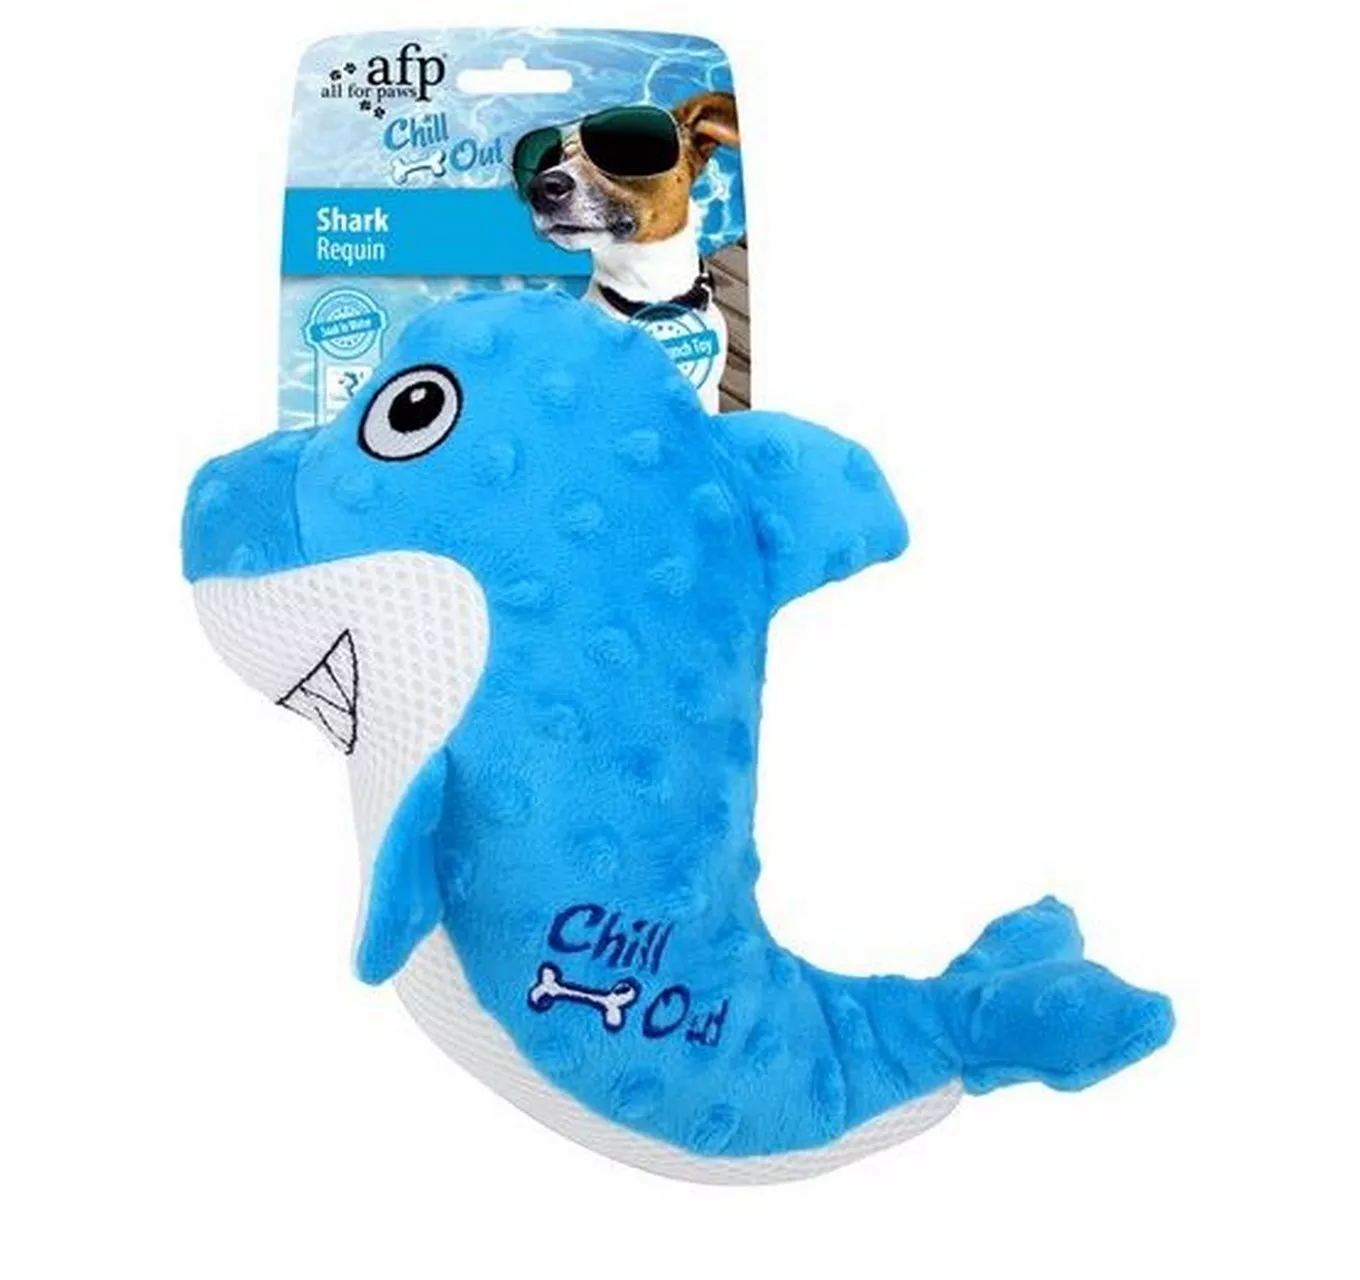 Chill Out Shark Toy